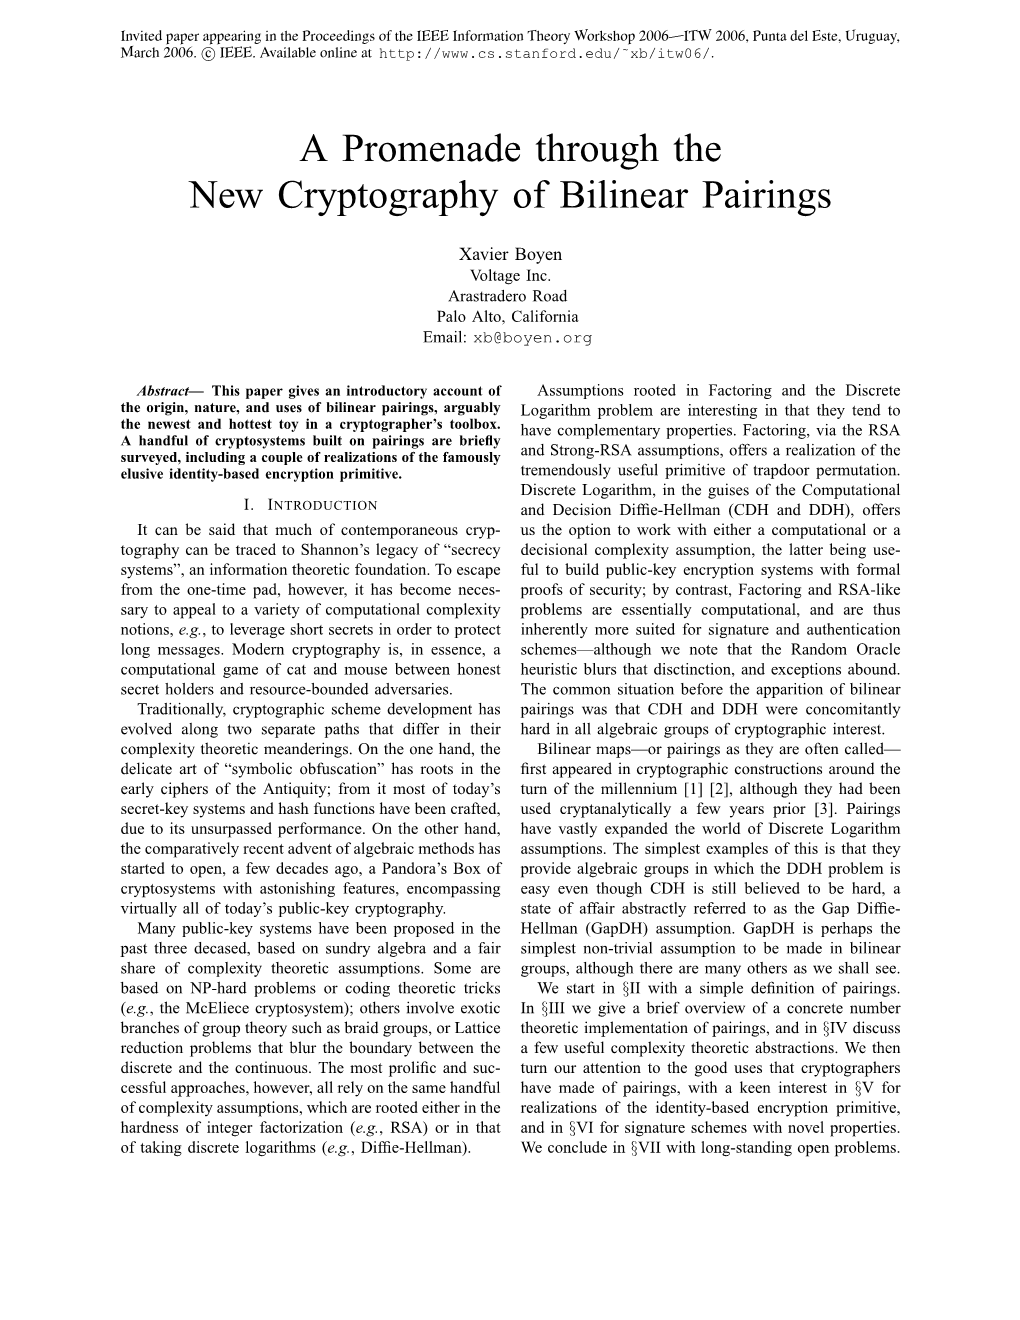 A Promenade Through the New Cryptography of Bilinear Pairings